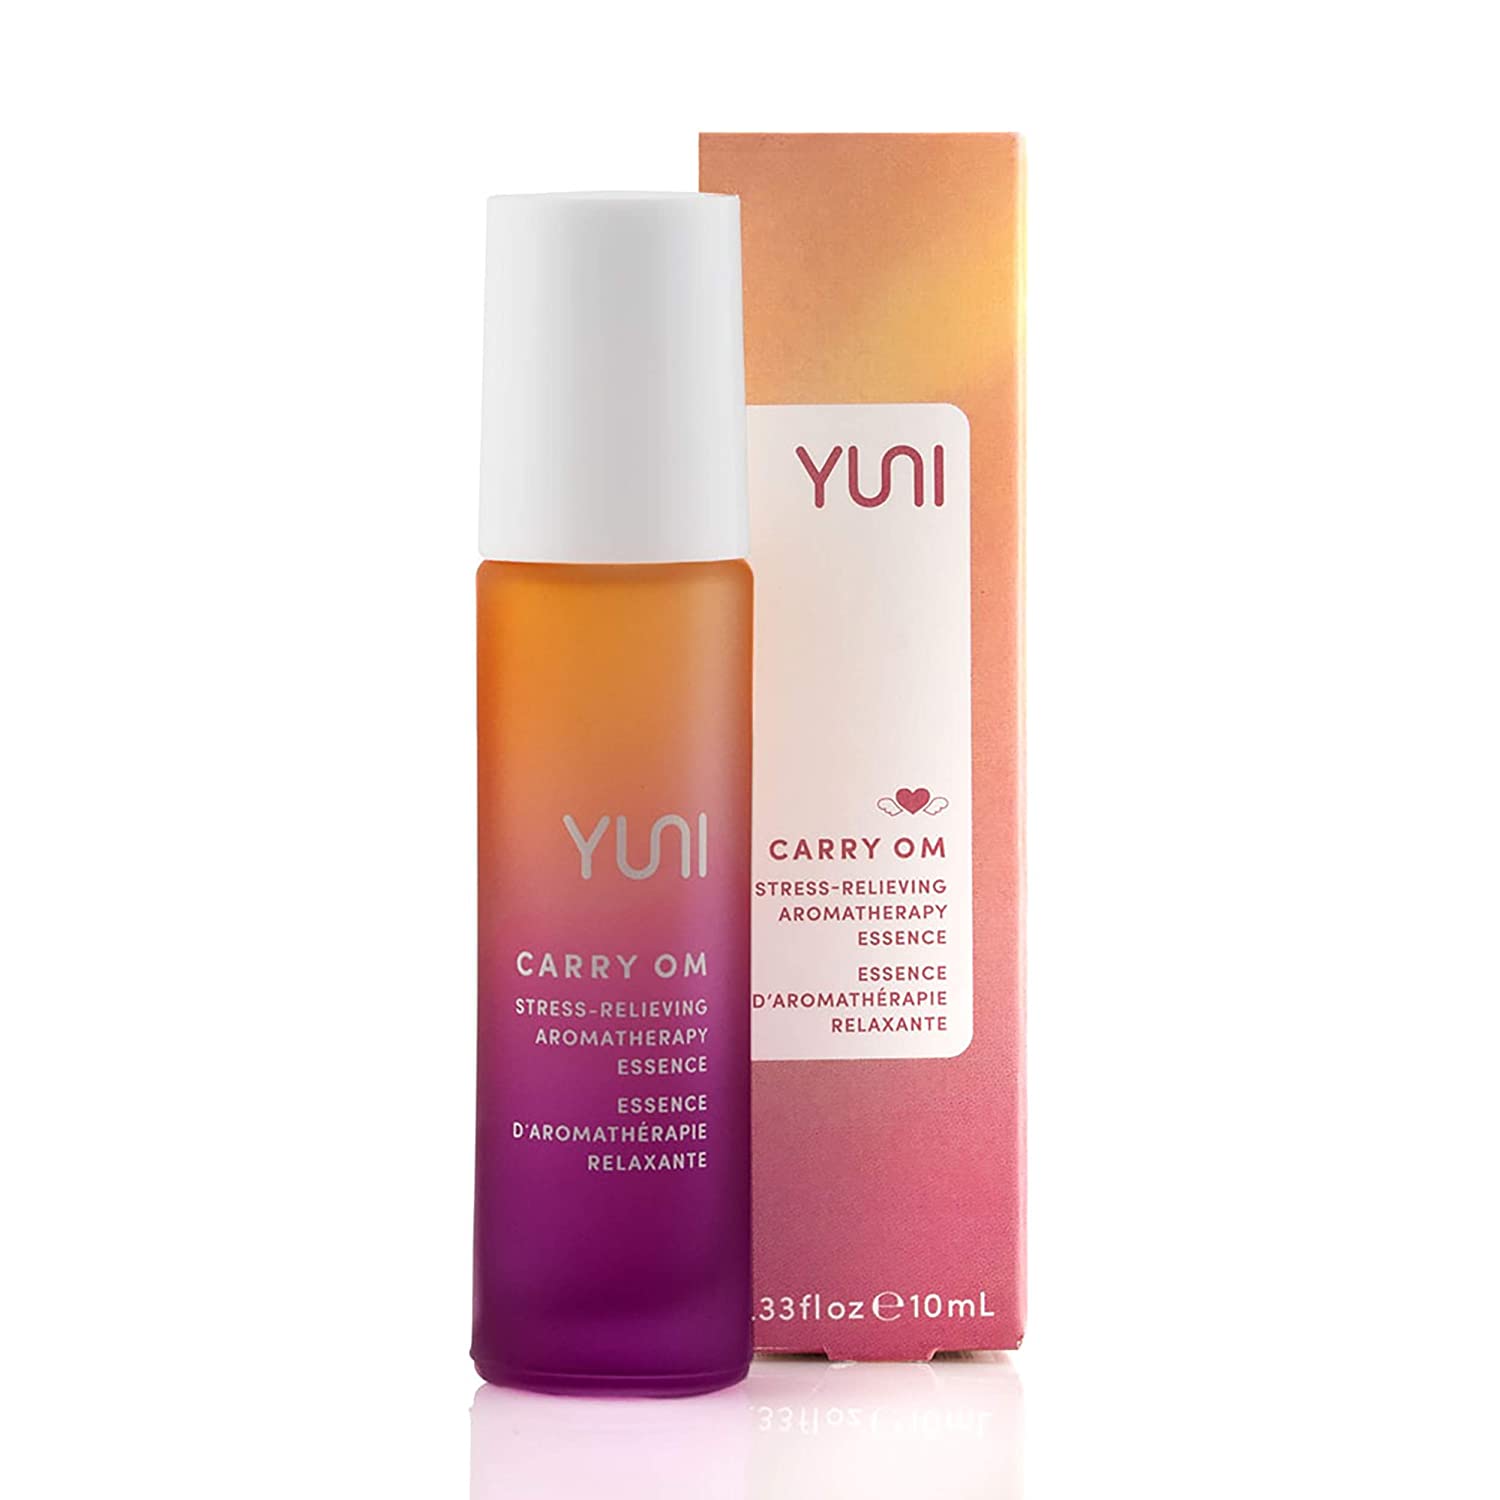 YUNI Beauty Carry Om Stress-relieving Aromatherapy Oil Roll On